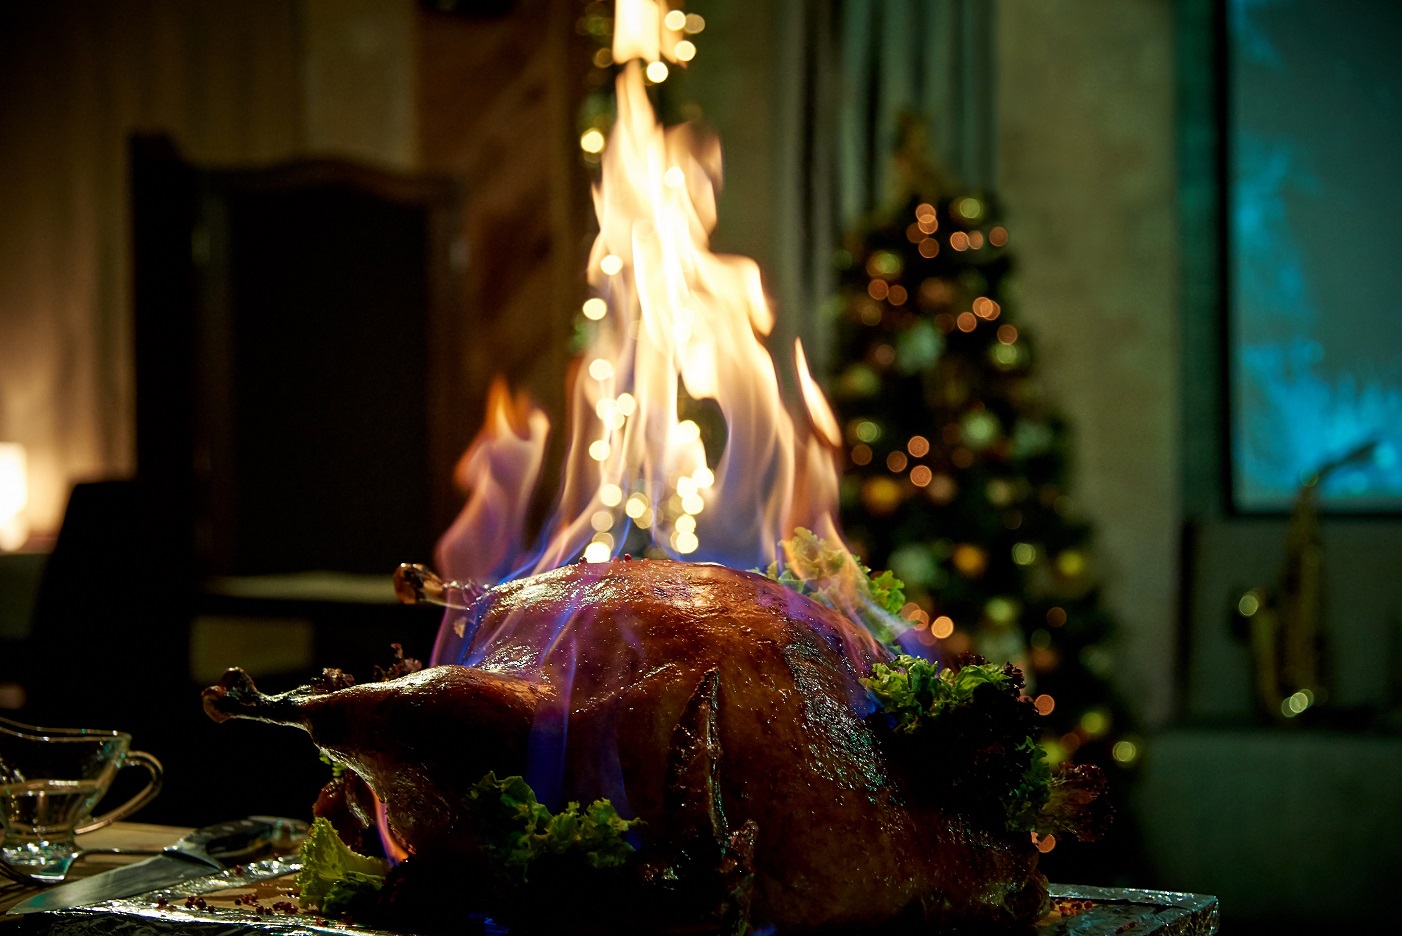 Turkey burning on fire holiday cooking